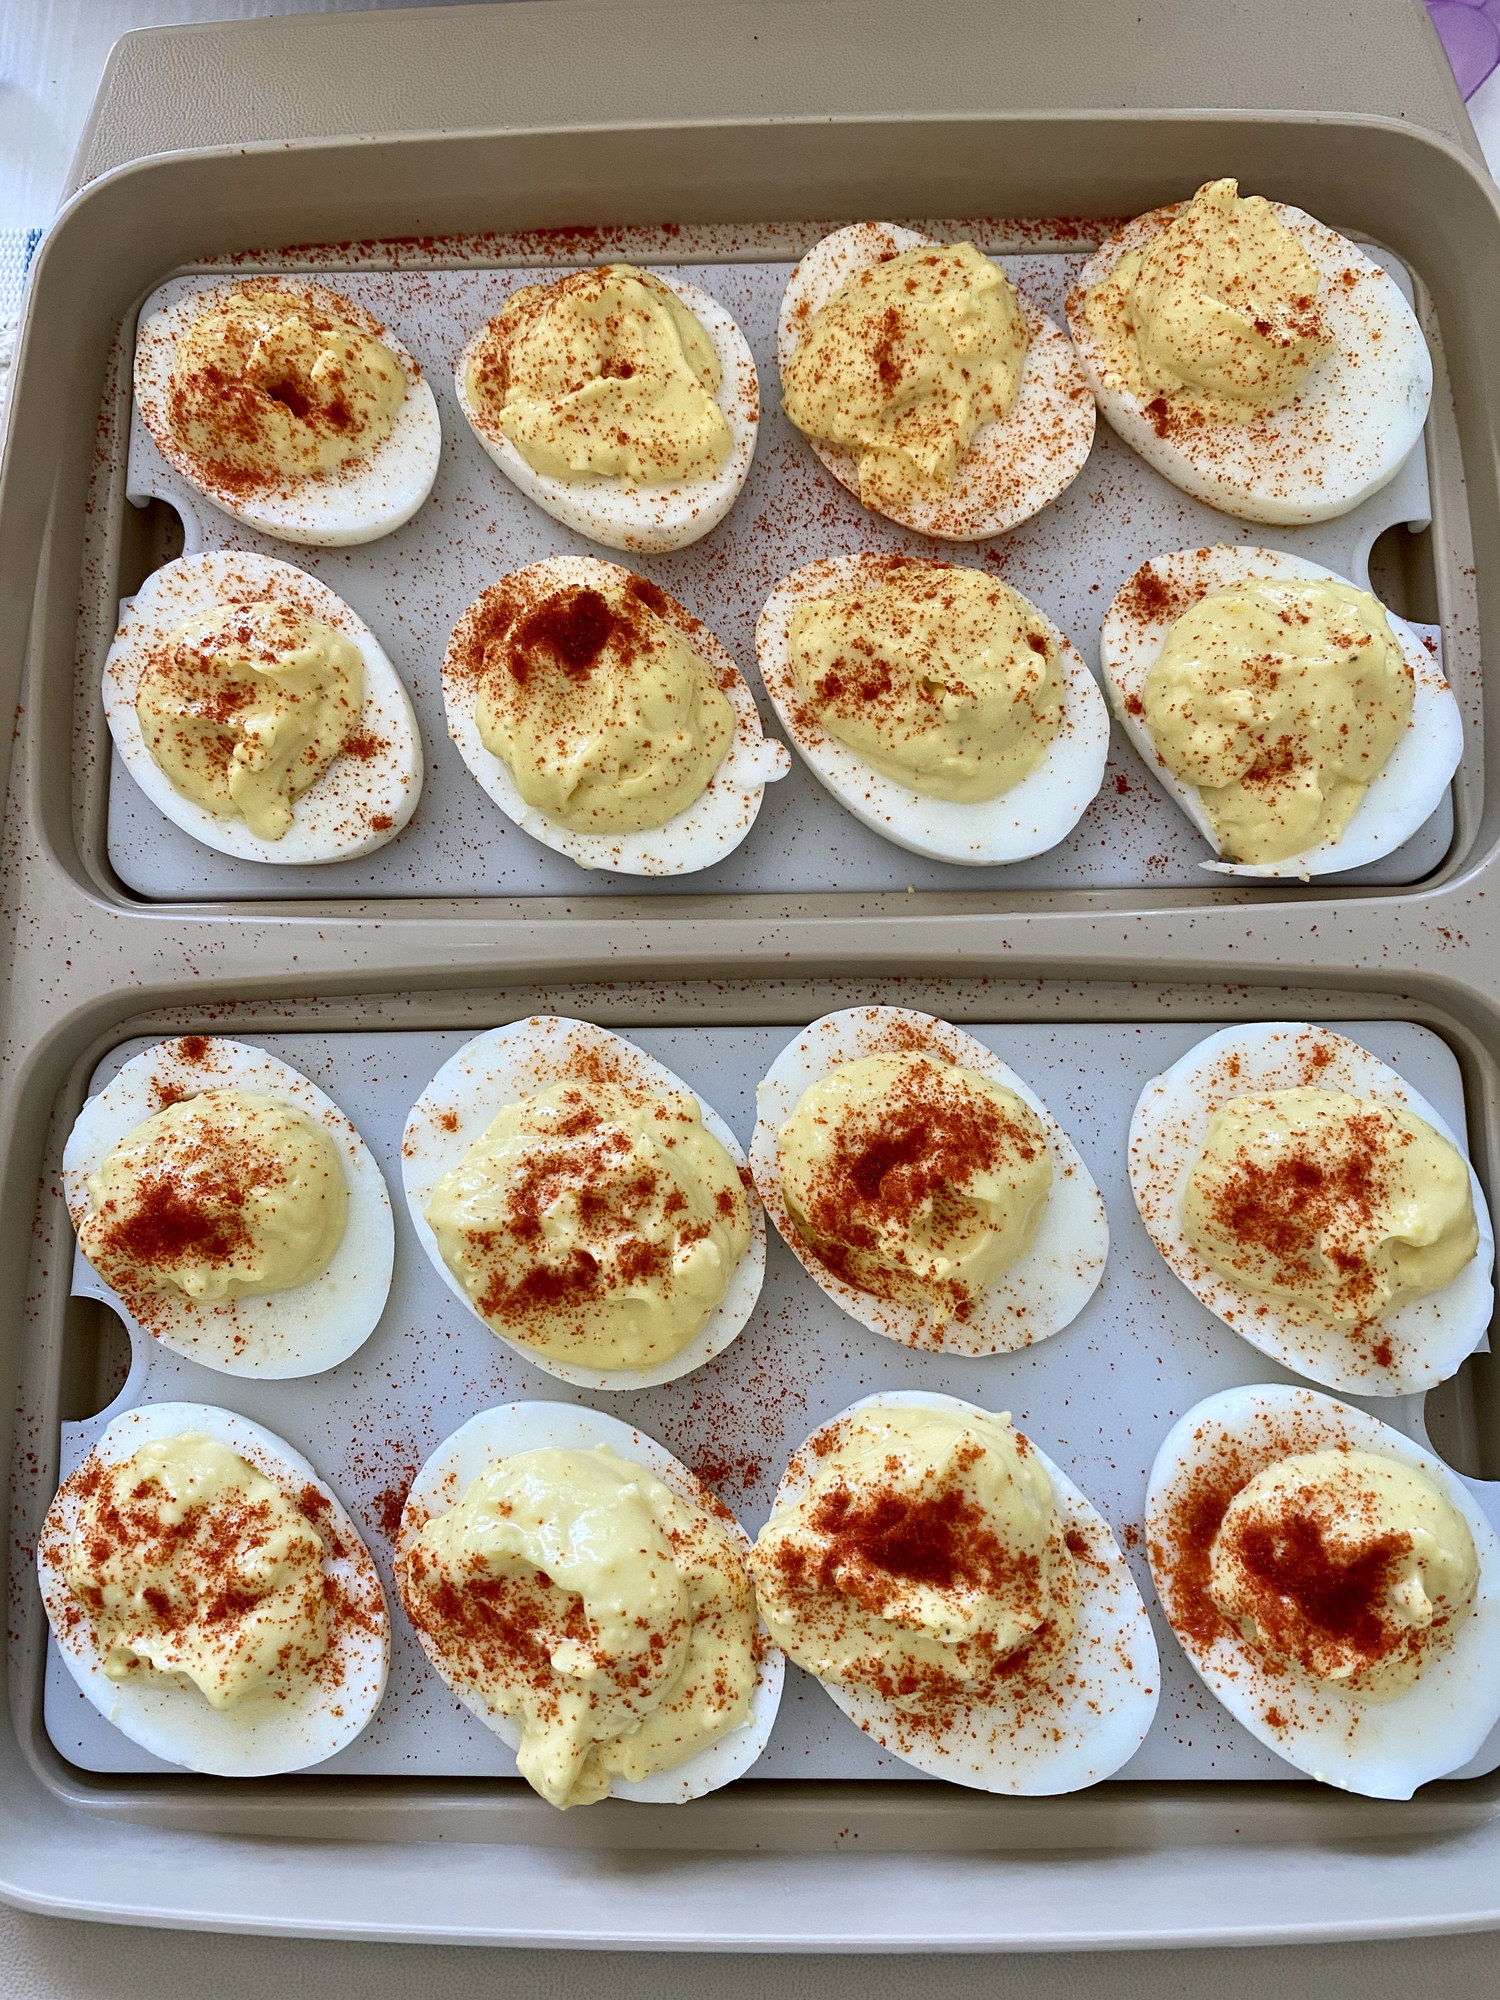 Deviled eggs topped with paprika.